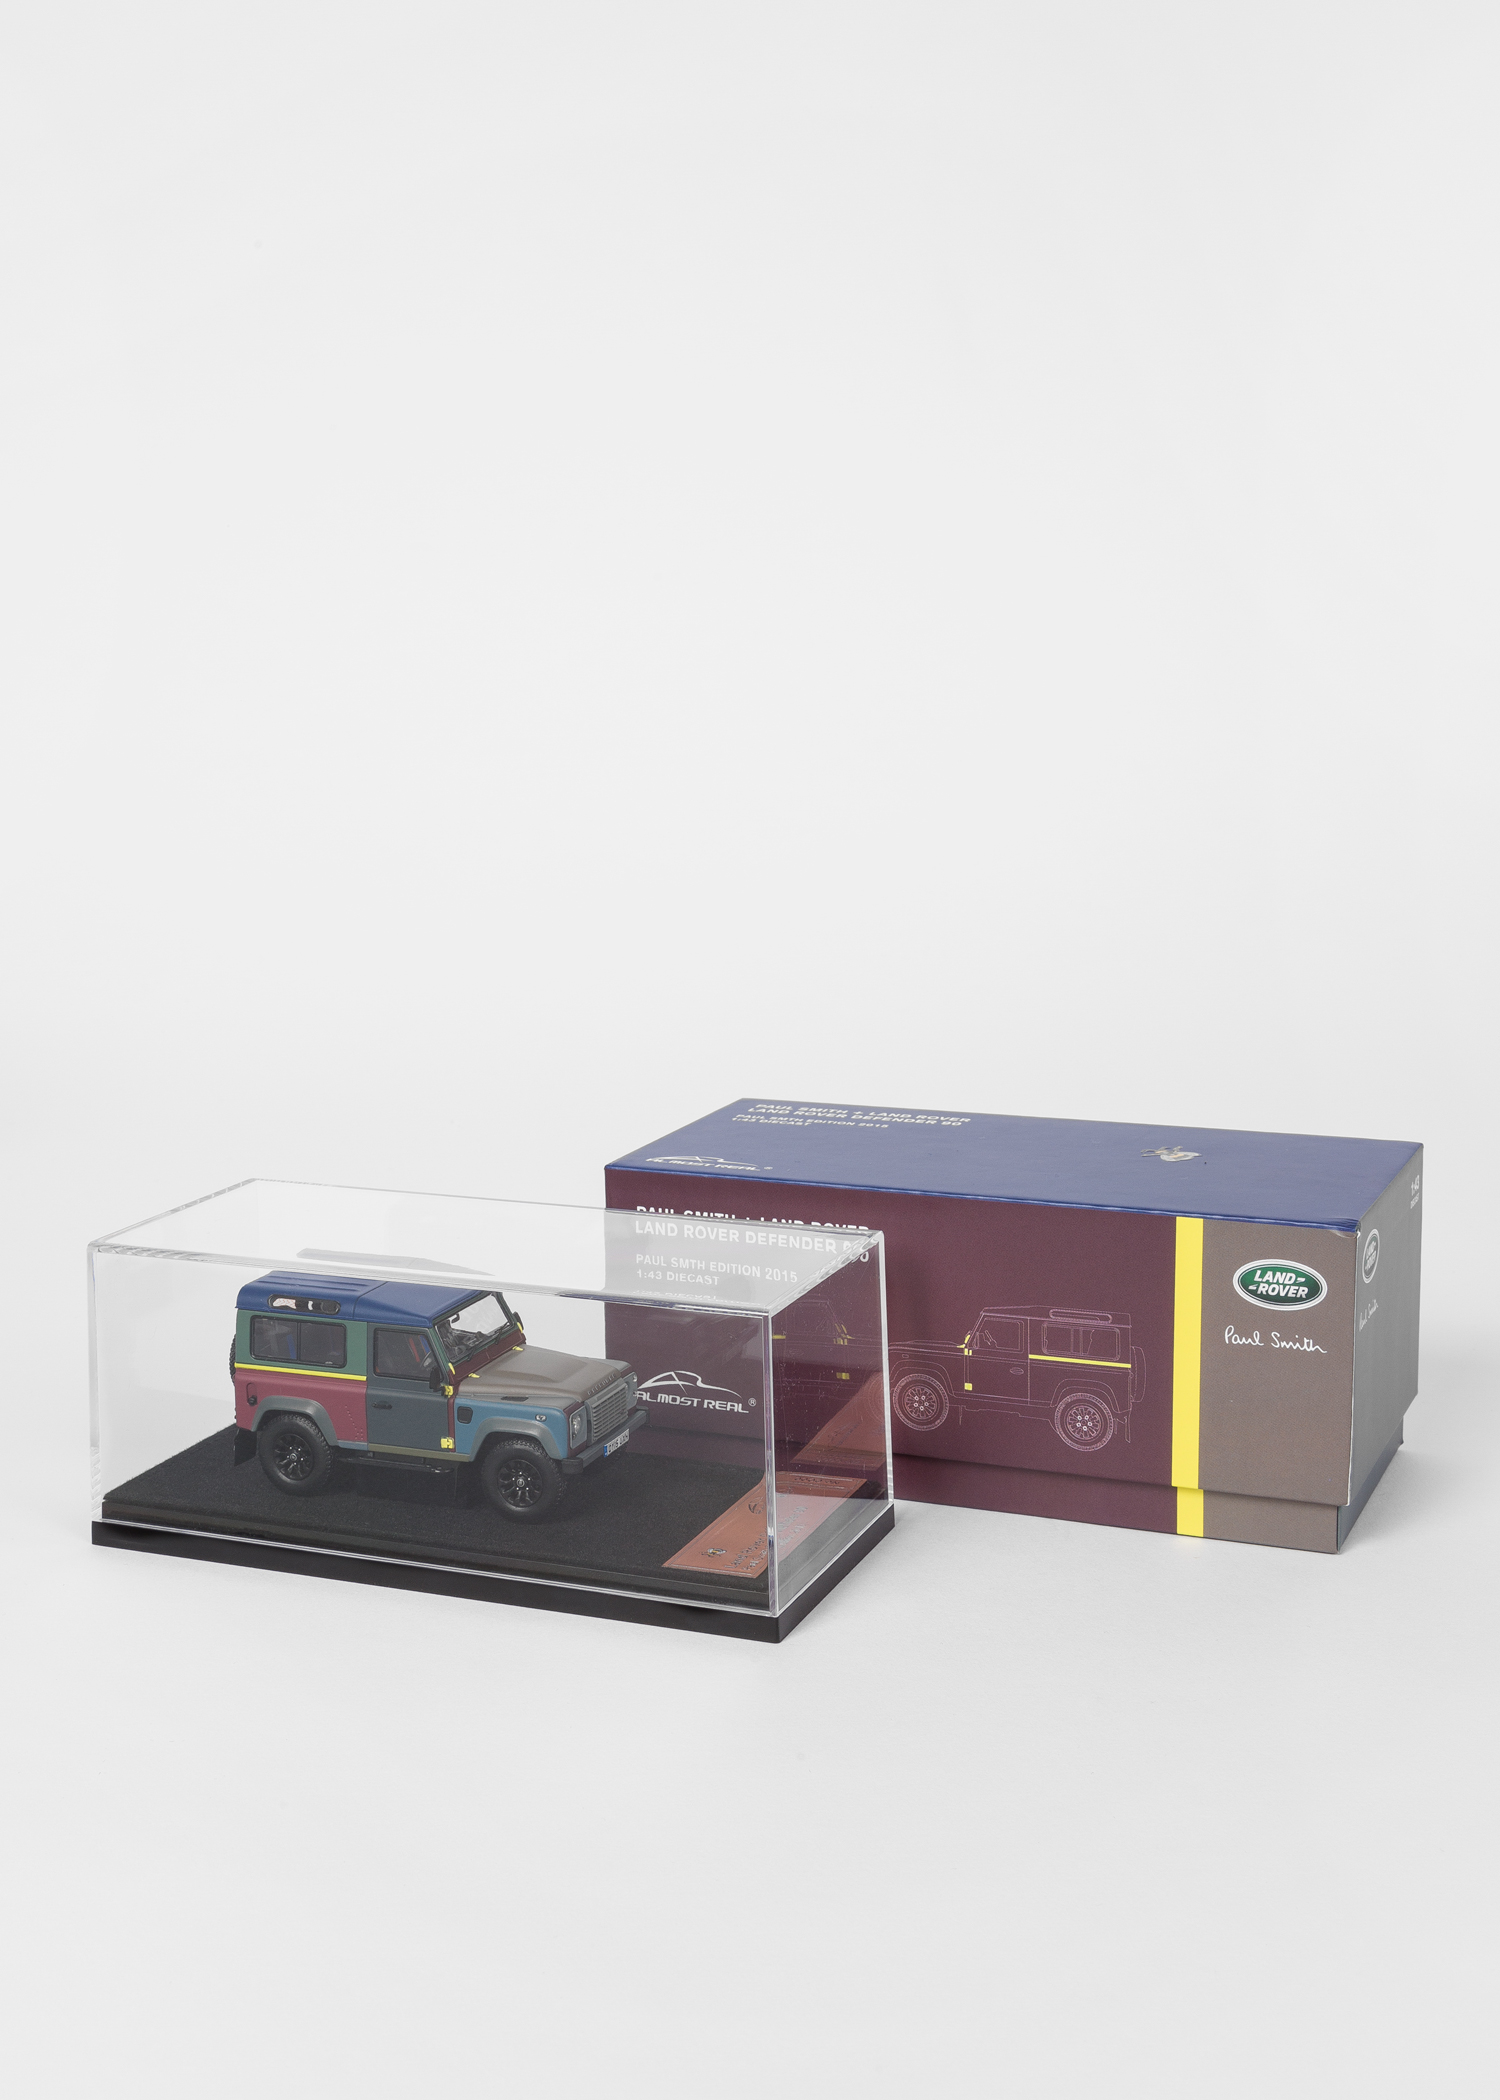 Box view - Paul Smith + Land Rover - Defender 90 1:43 Die Cast Metal Collector's Edition 